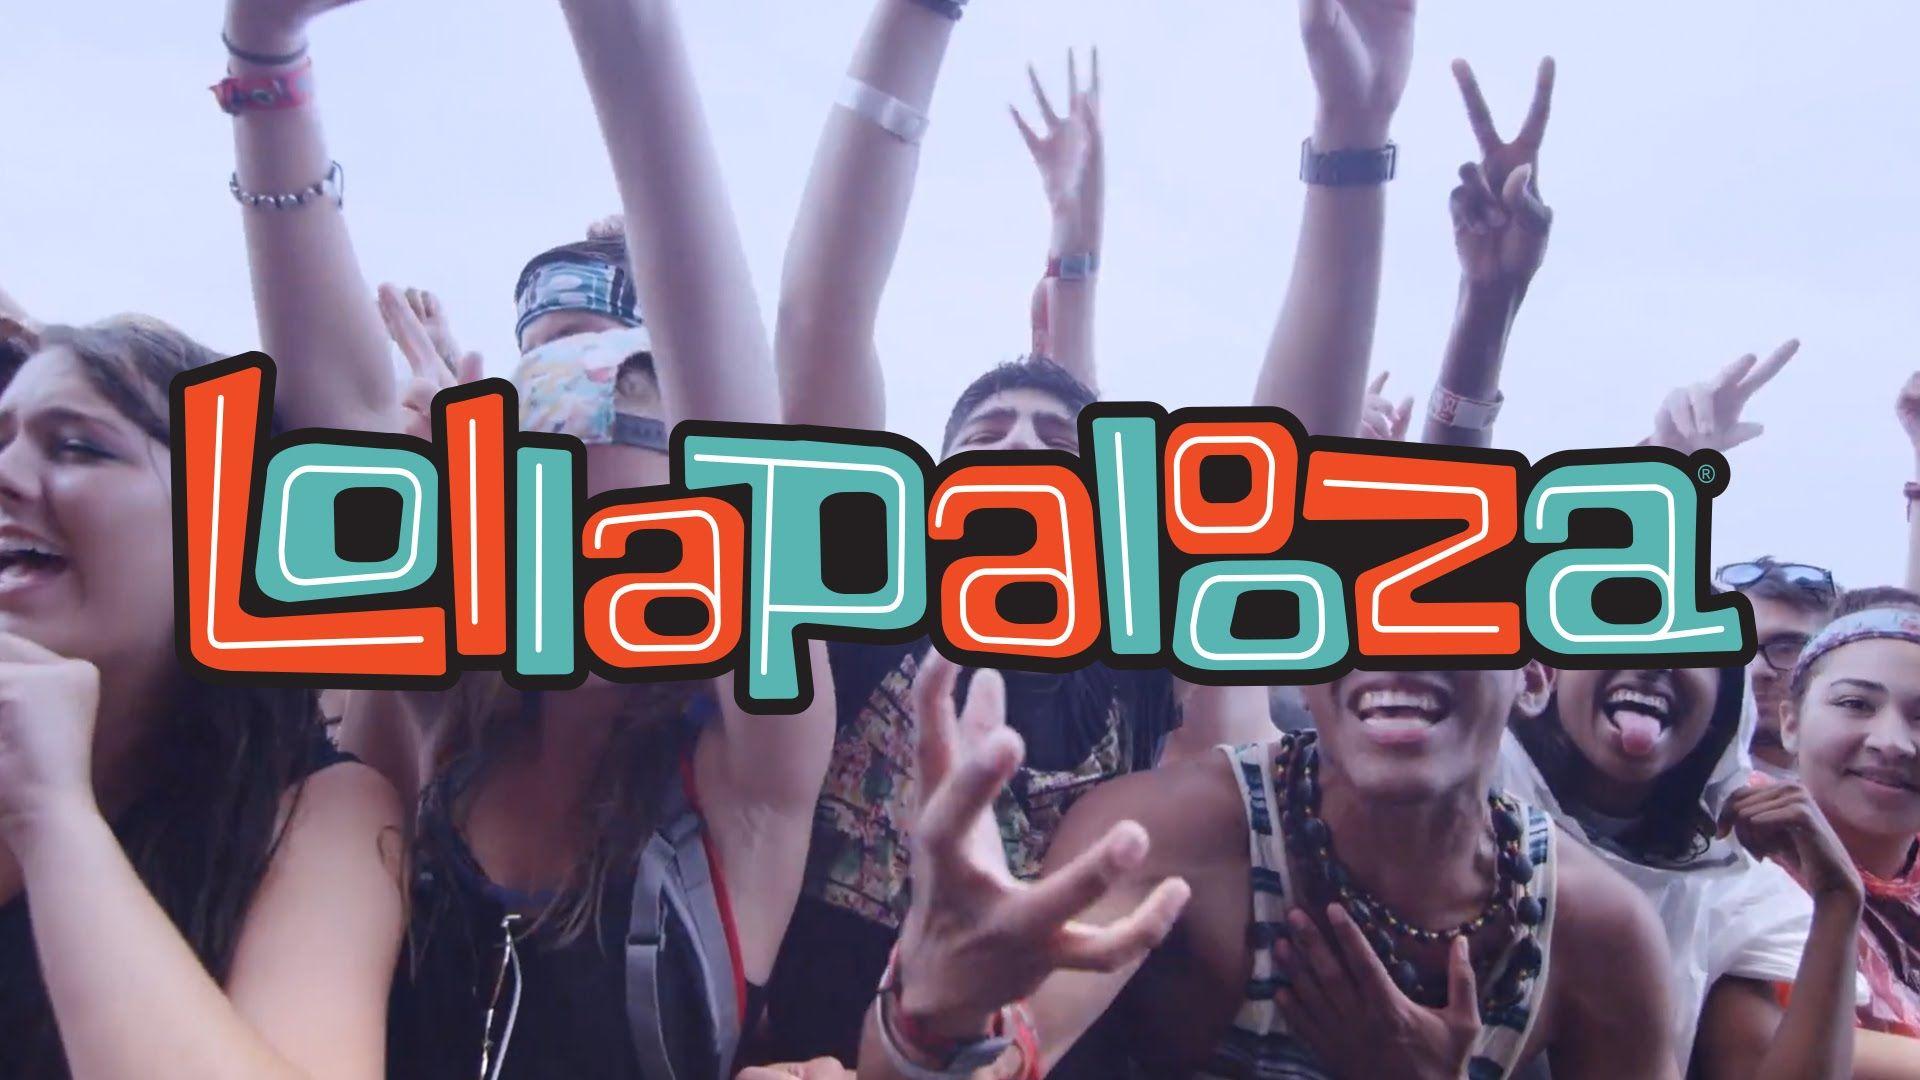 Lollapalooza 2015 vendors show some of the best of what Chicago has